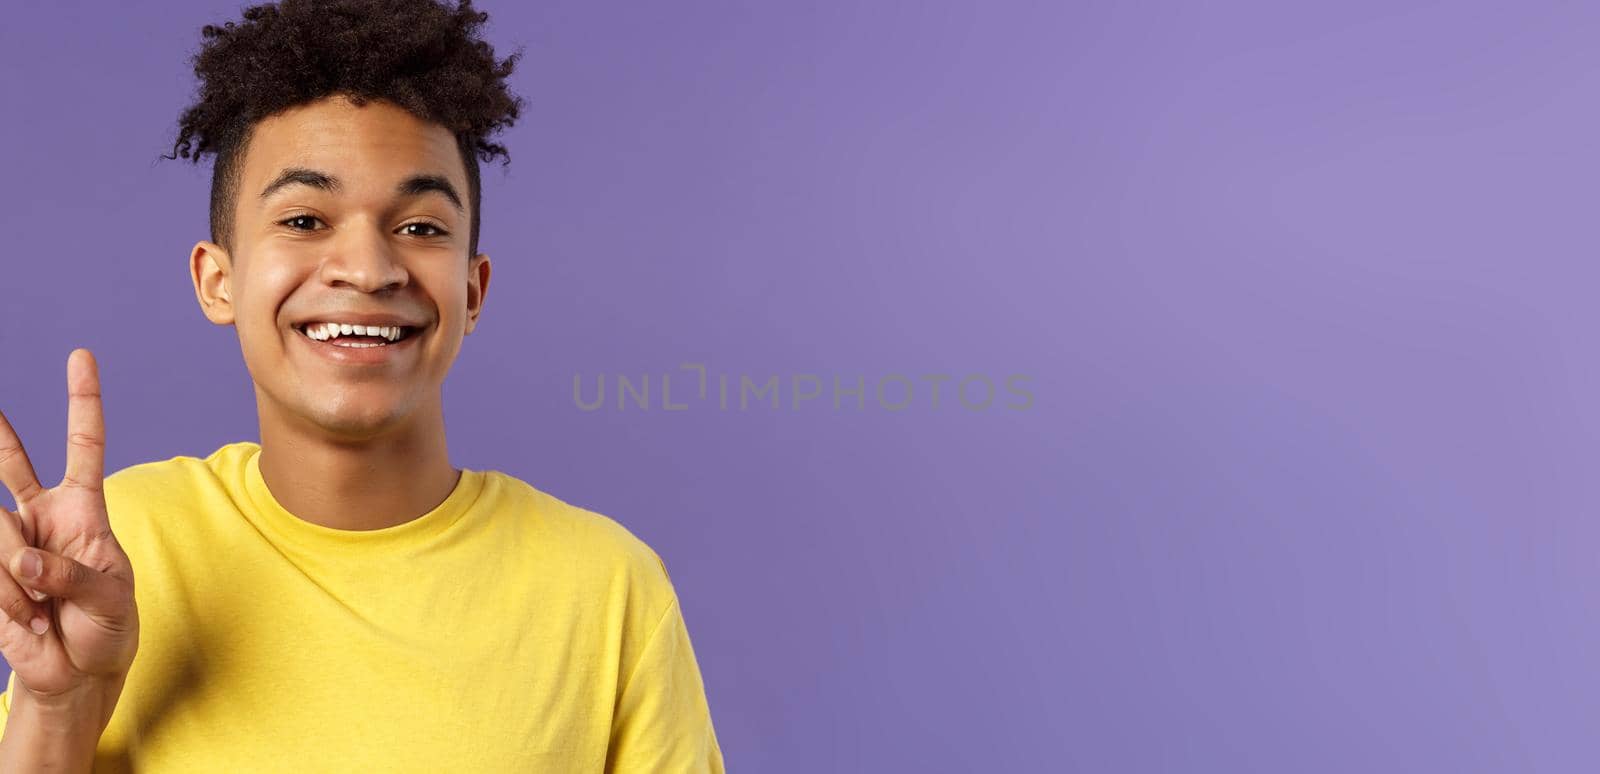 Close-up portrait of handsome upbeat young teenage guy with afro hairstyle, show peace sign and smiling, wear yellow t-shirt, staying optimistic and positive, purple background.